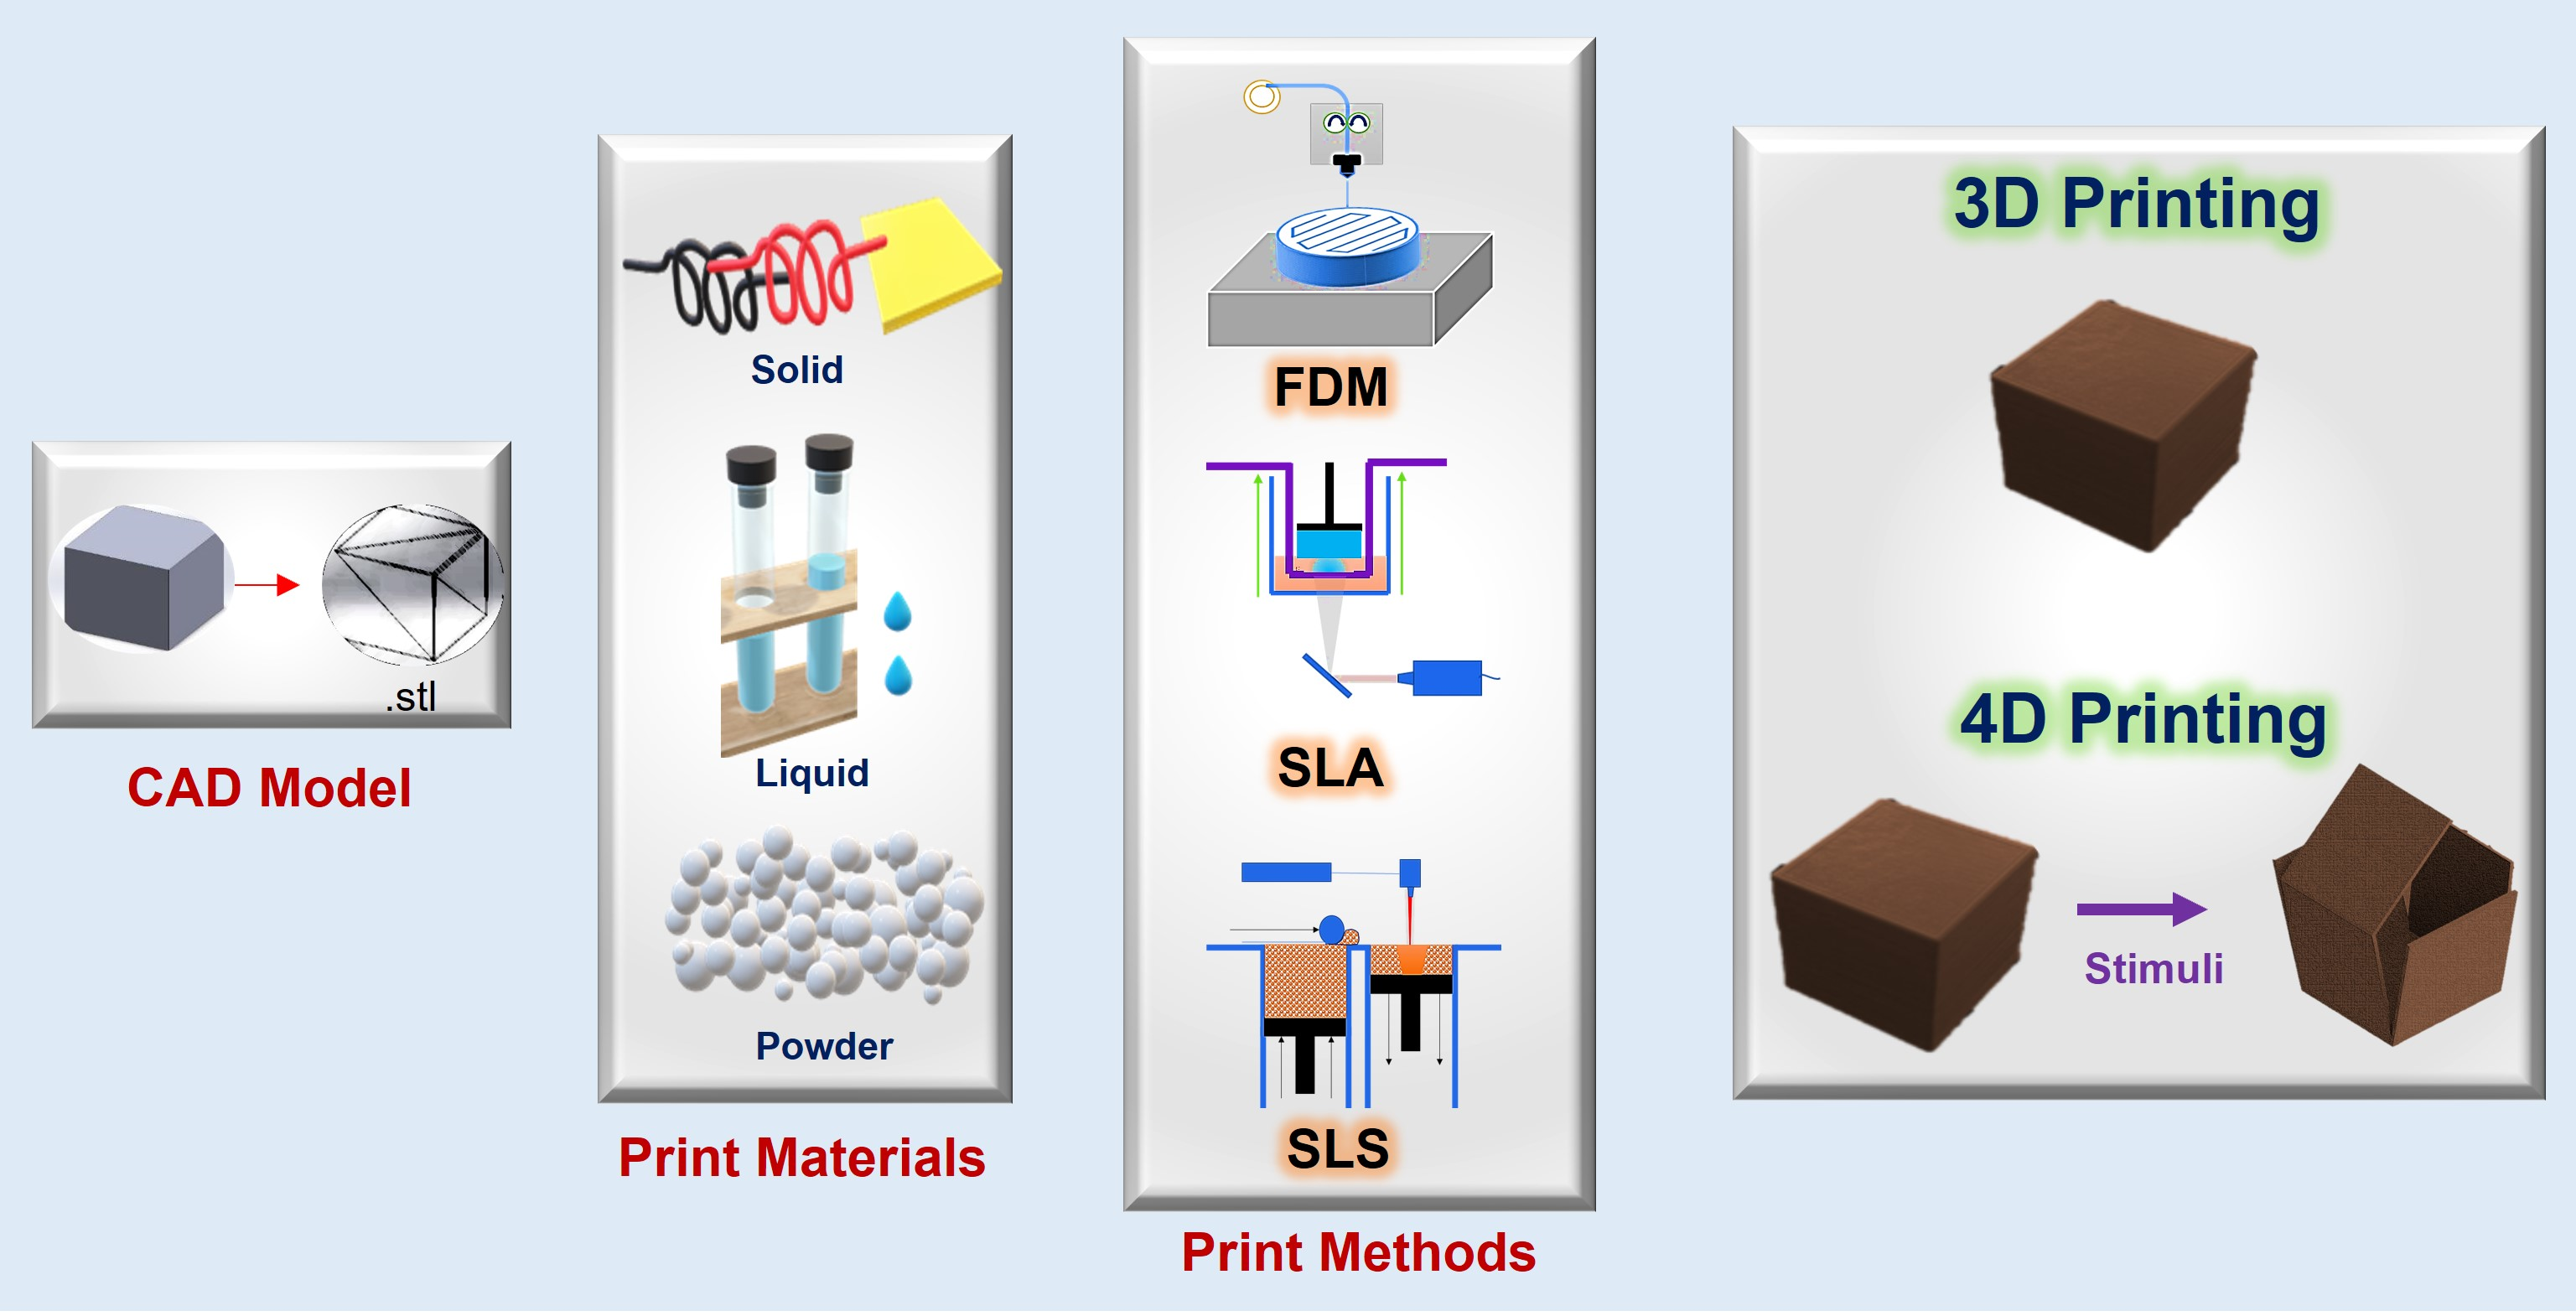 3D Printing of Functionally Graded Films by Controlling Process Parameters